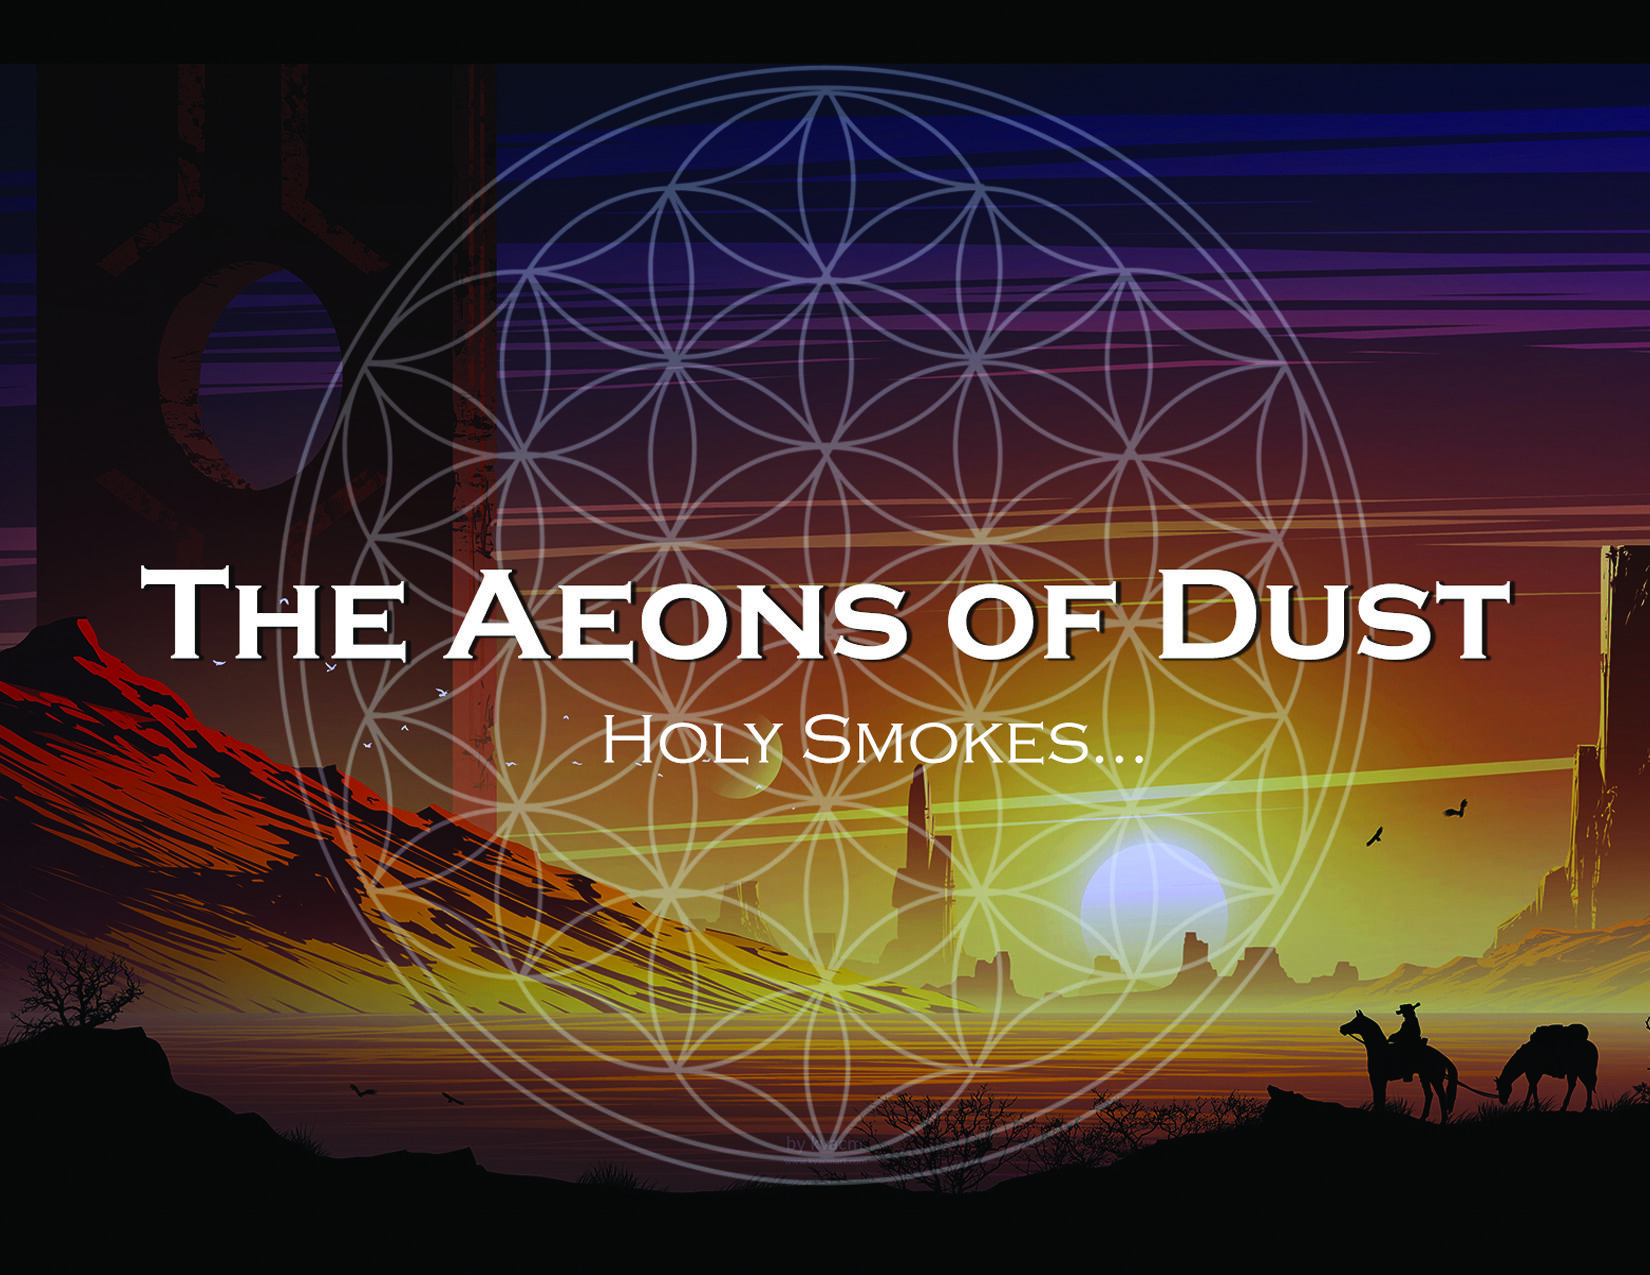 THE AEONS OF DUST